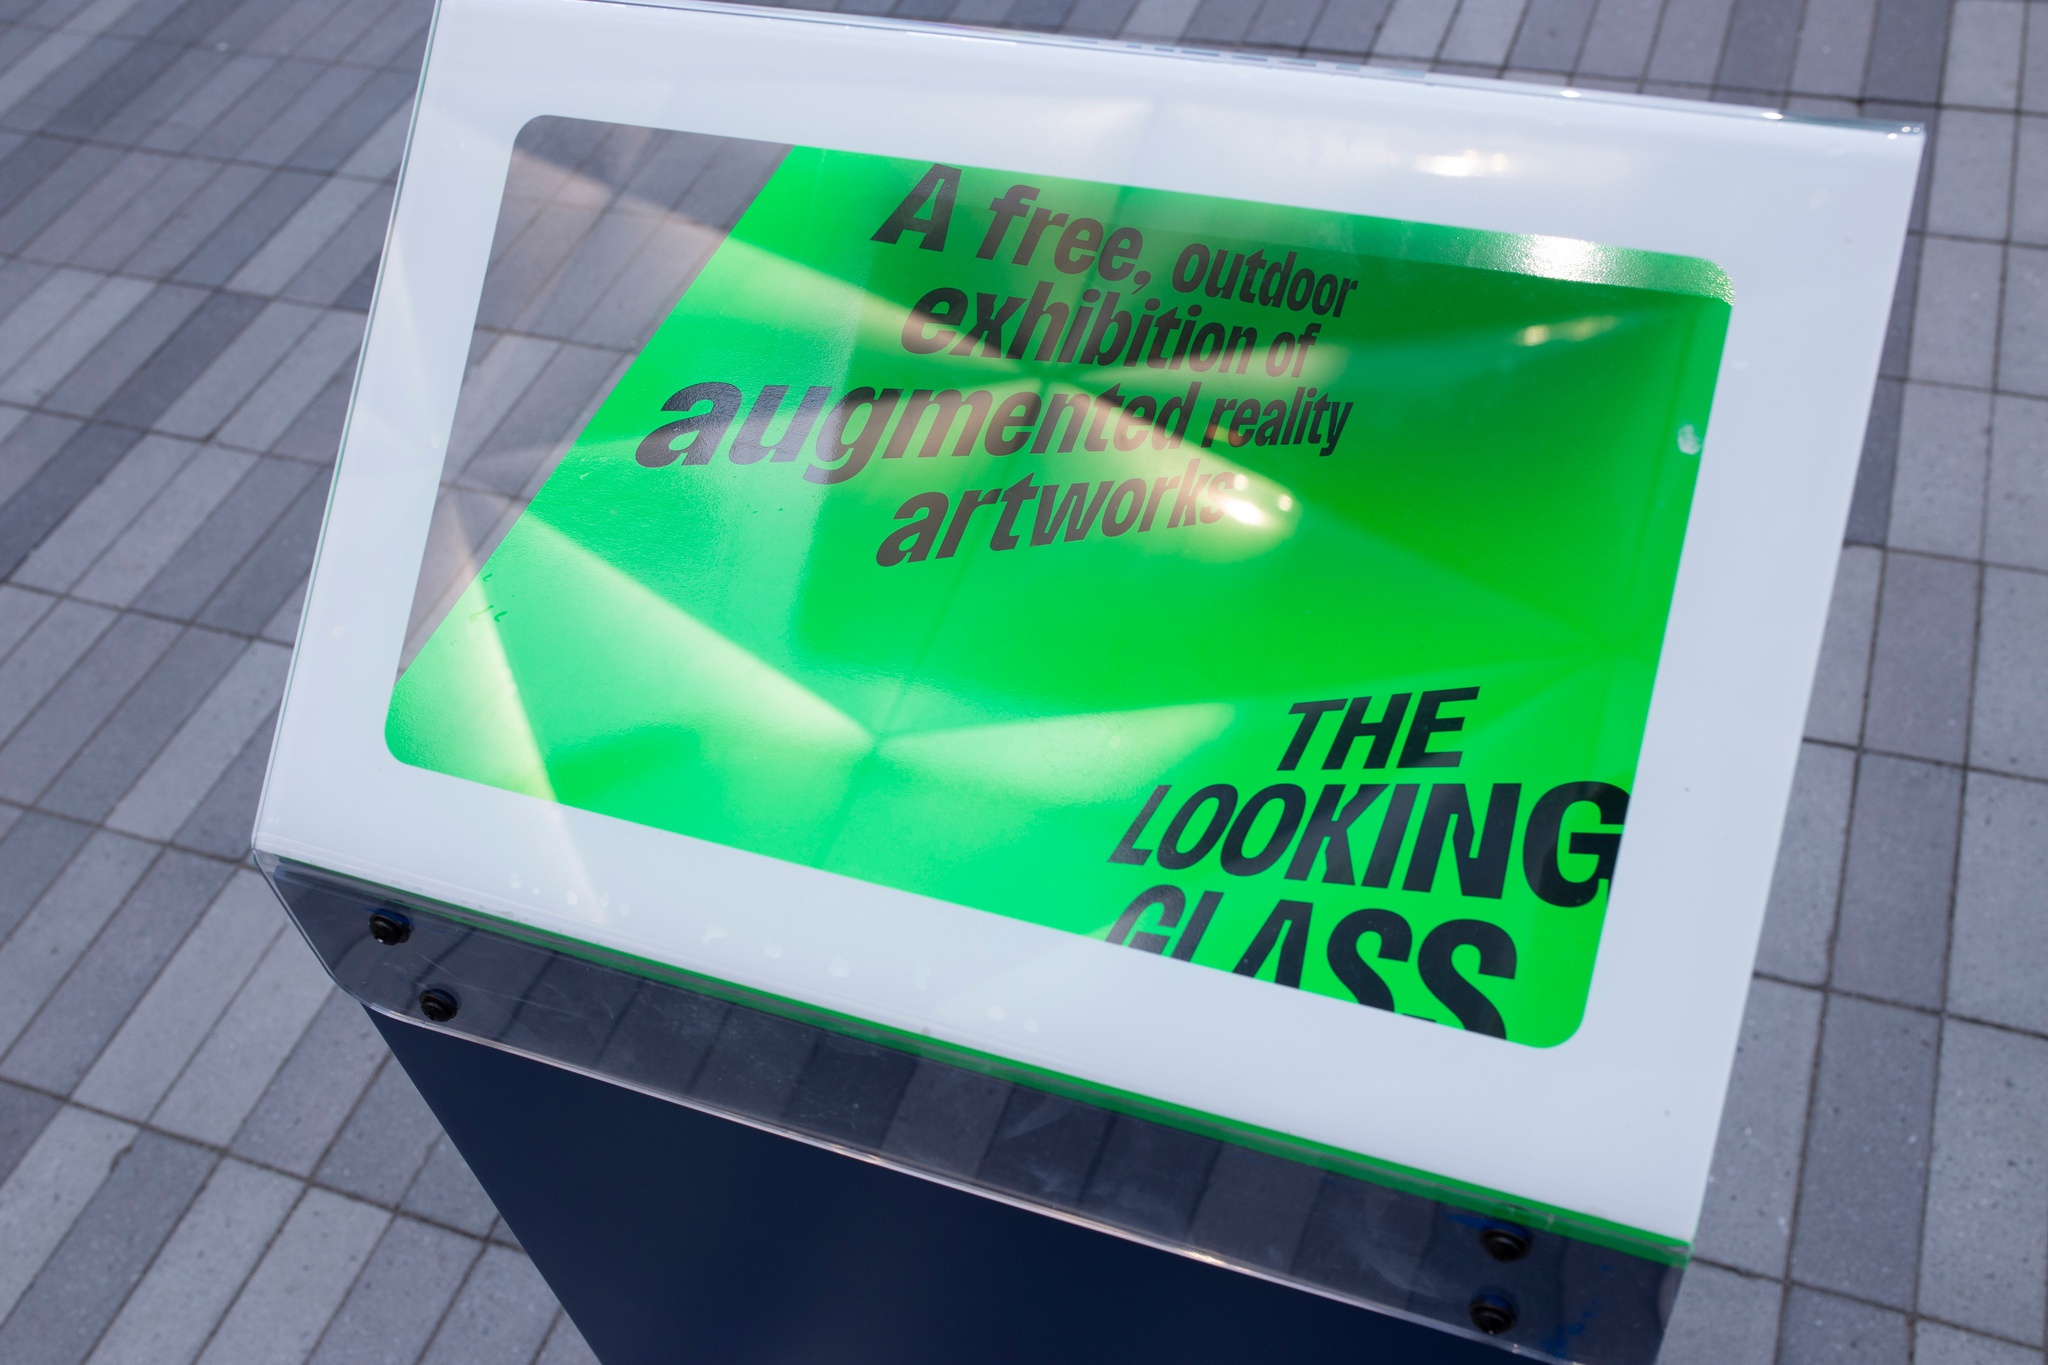 A green label with the words "The Looking Glass, A free outdoor exhibition of augmented reality artworks" under a transparent plastic cover that reflects some light